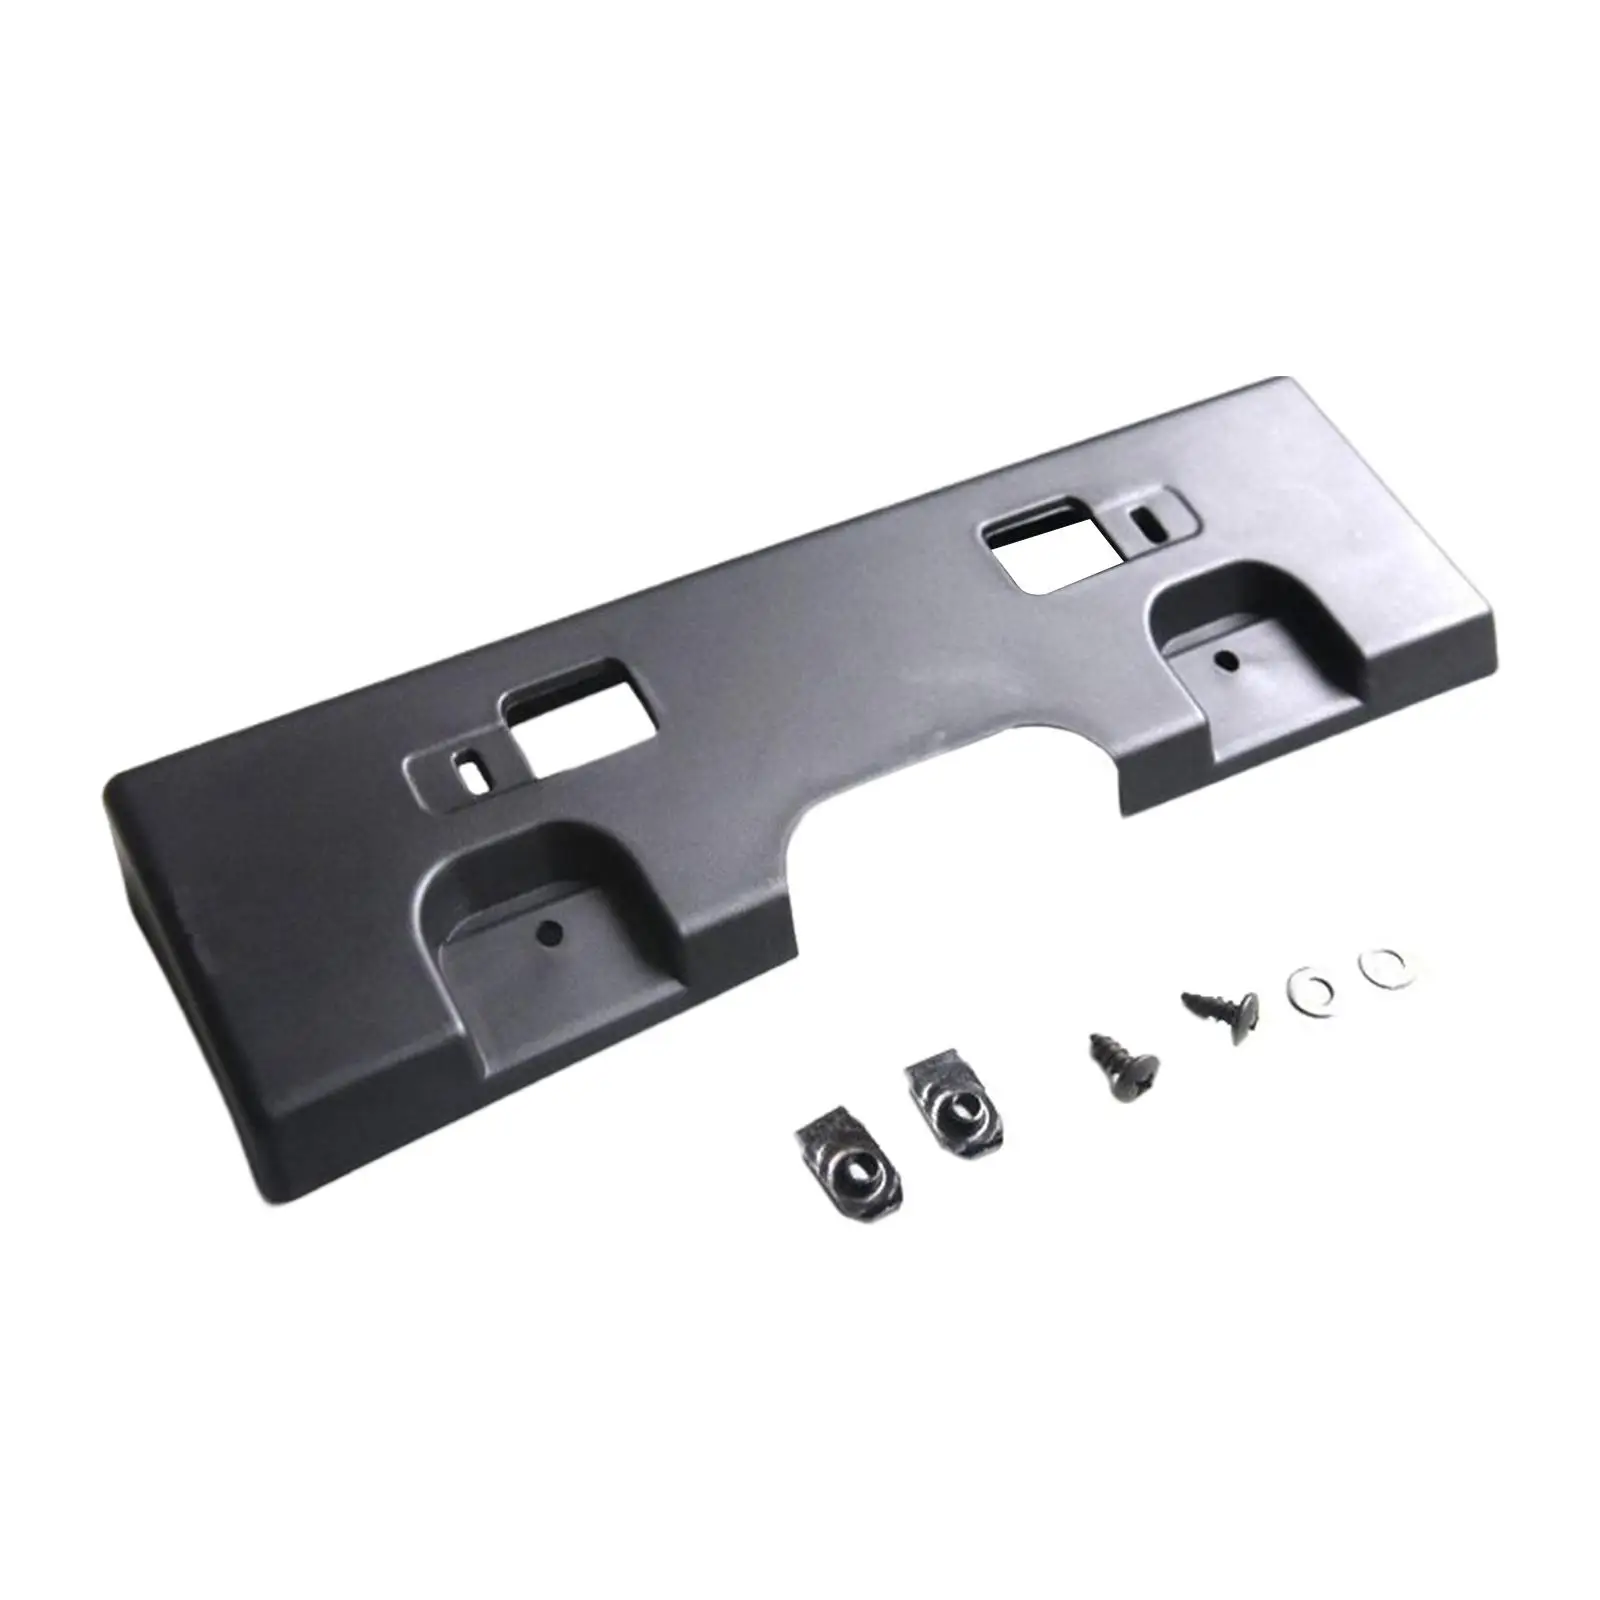 Front Bumper License Plate Bracket with HW Plastic License Tag Holder Fits for SENTRA 2007-12 847227091233 Car Supplies